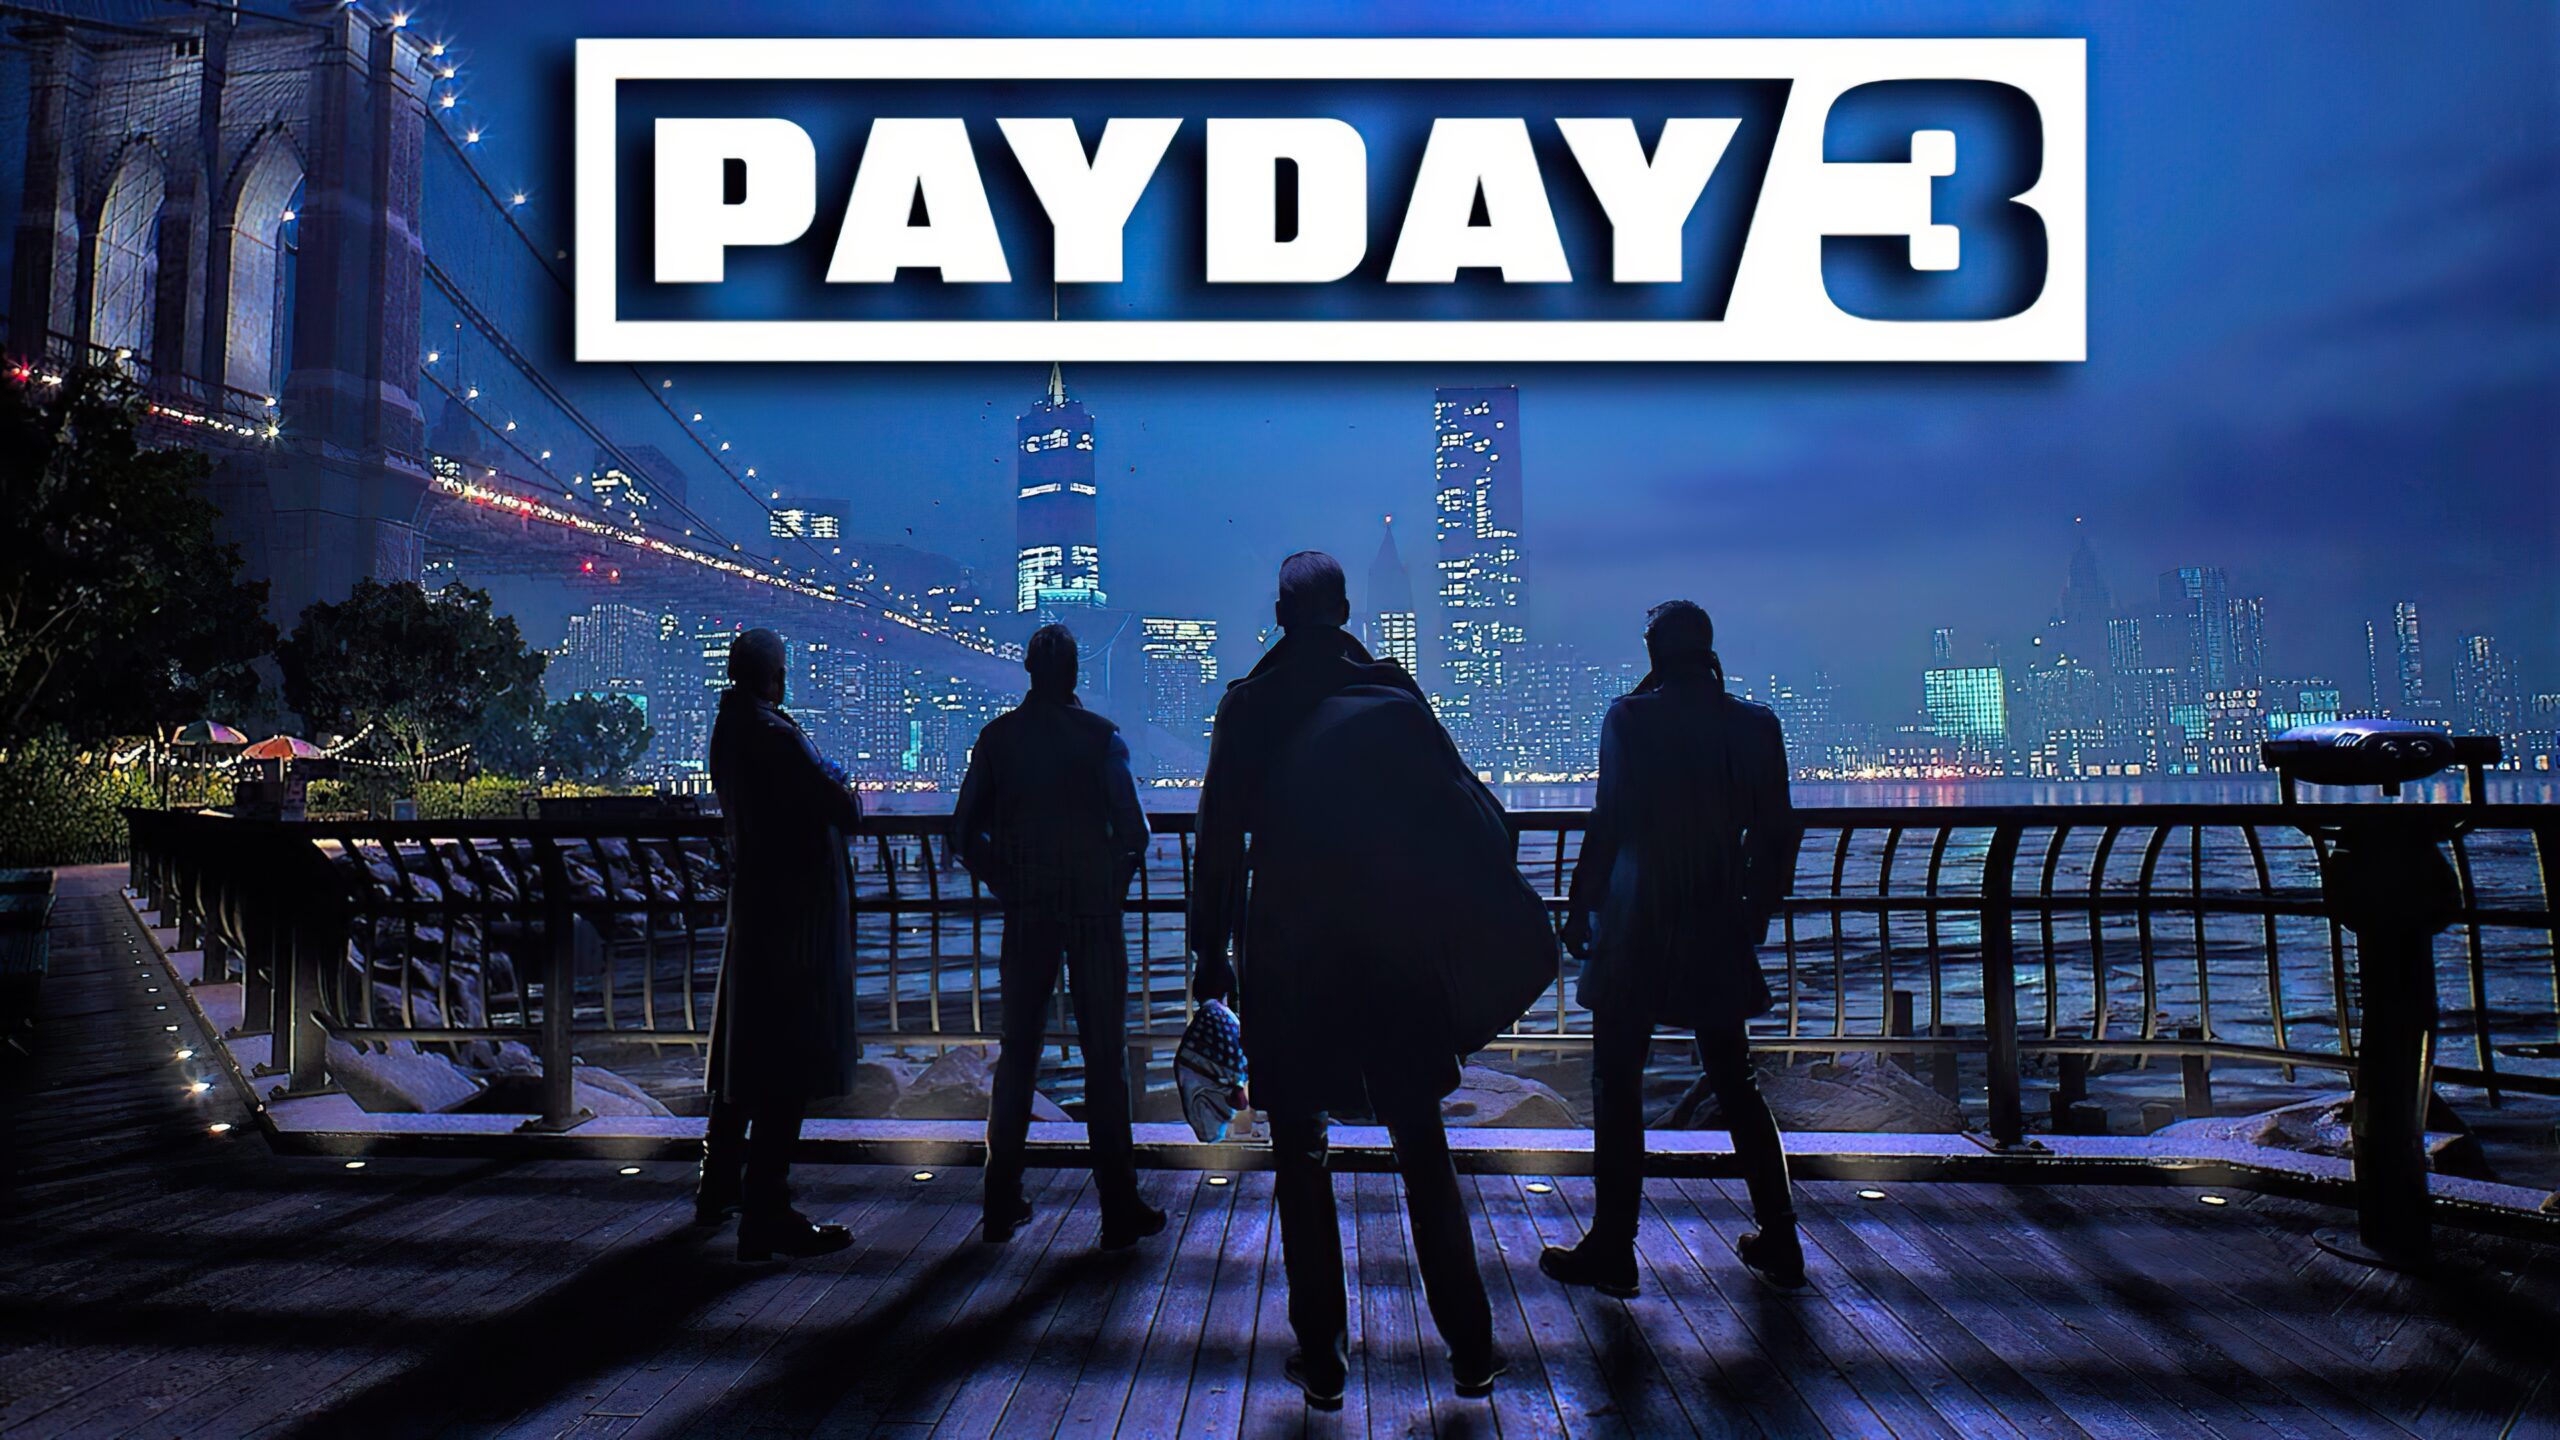 PayDay 3 - Lançamento Day One no Game Pass! 